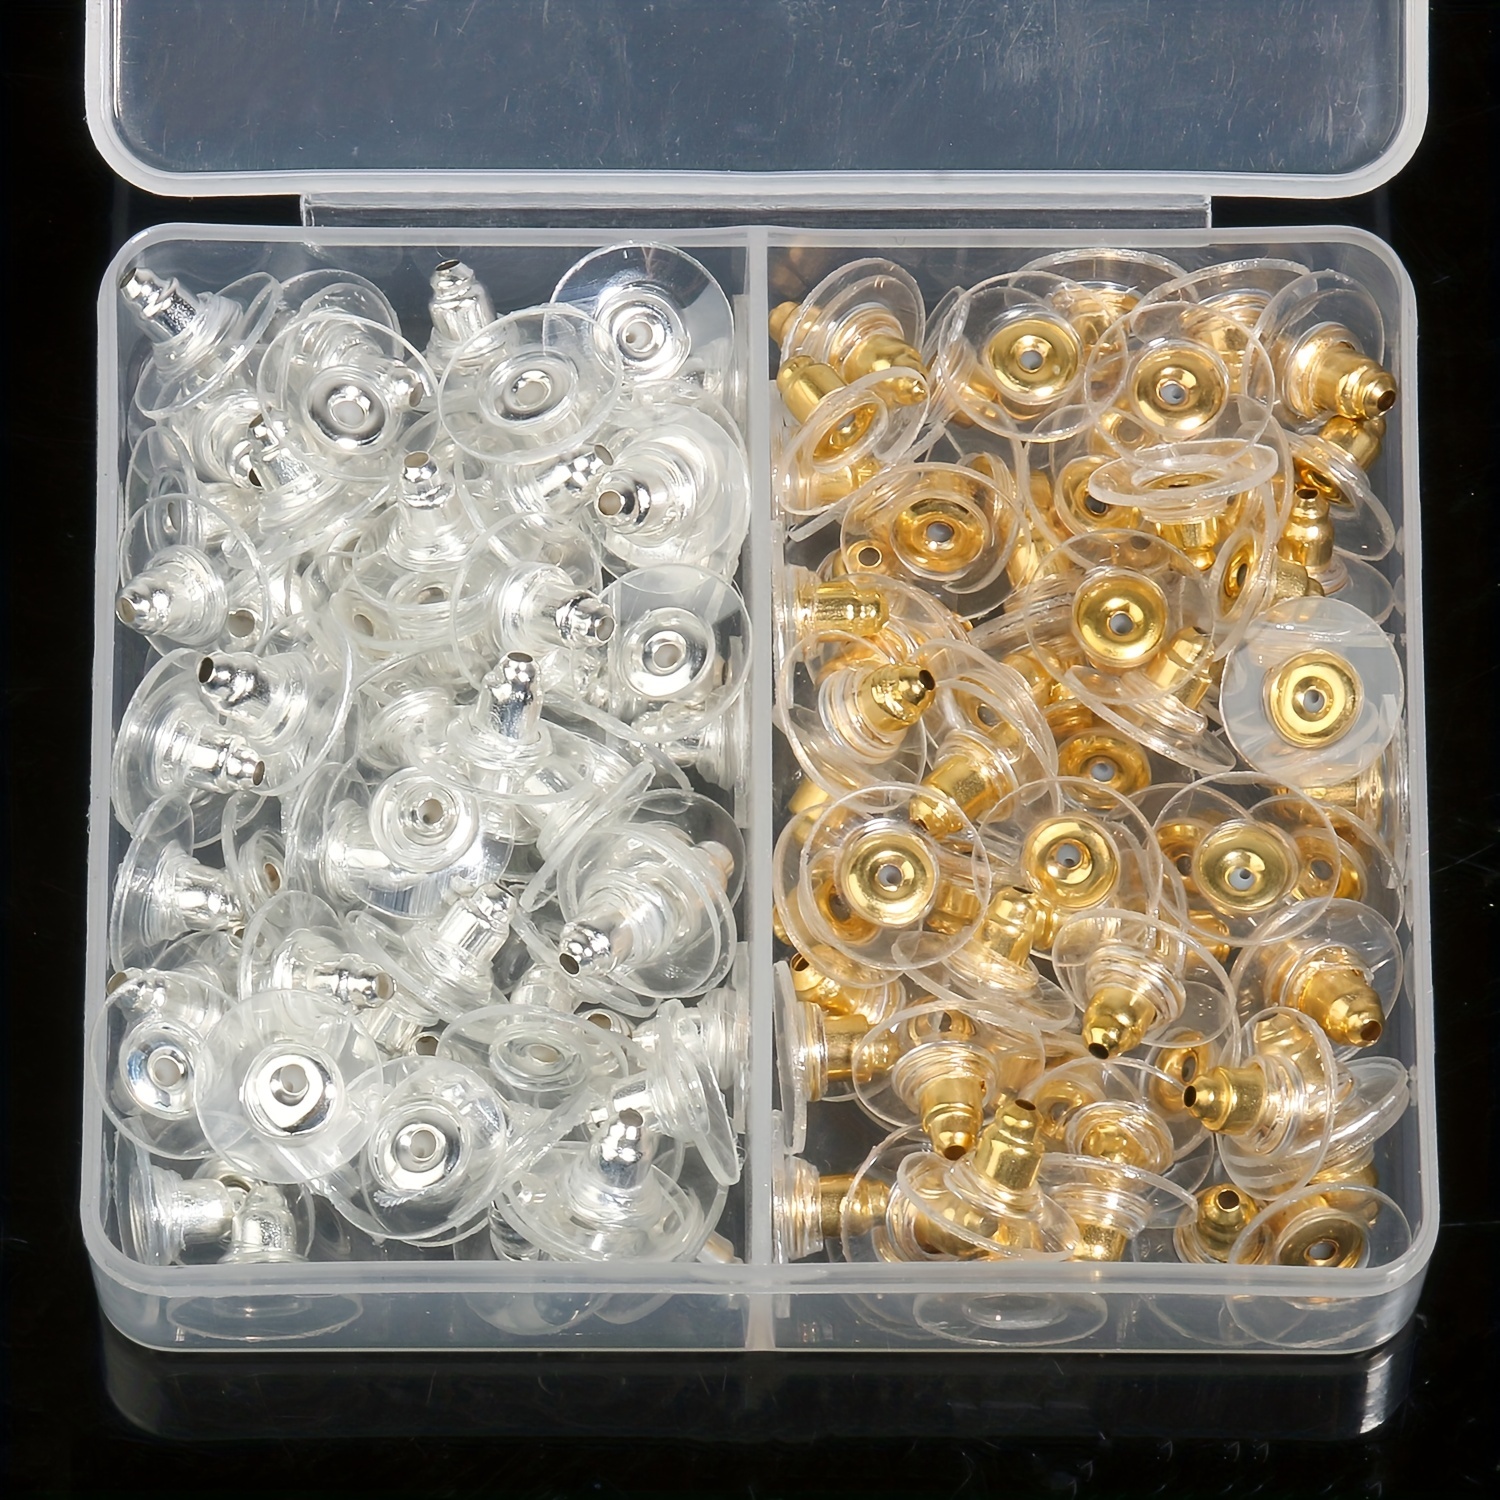  100pcs Bullet Clutch Earring Backs with Pad 50pairs Earring  Safety Backs, Earring Backs for Dropy Ears Studs Fishhook Earring Backs  Replacements Clutch Back Earrings Replacement for Heavy Earring